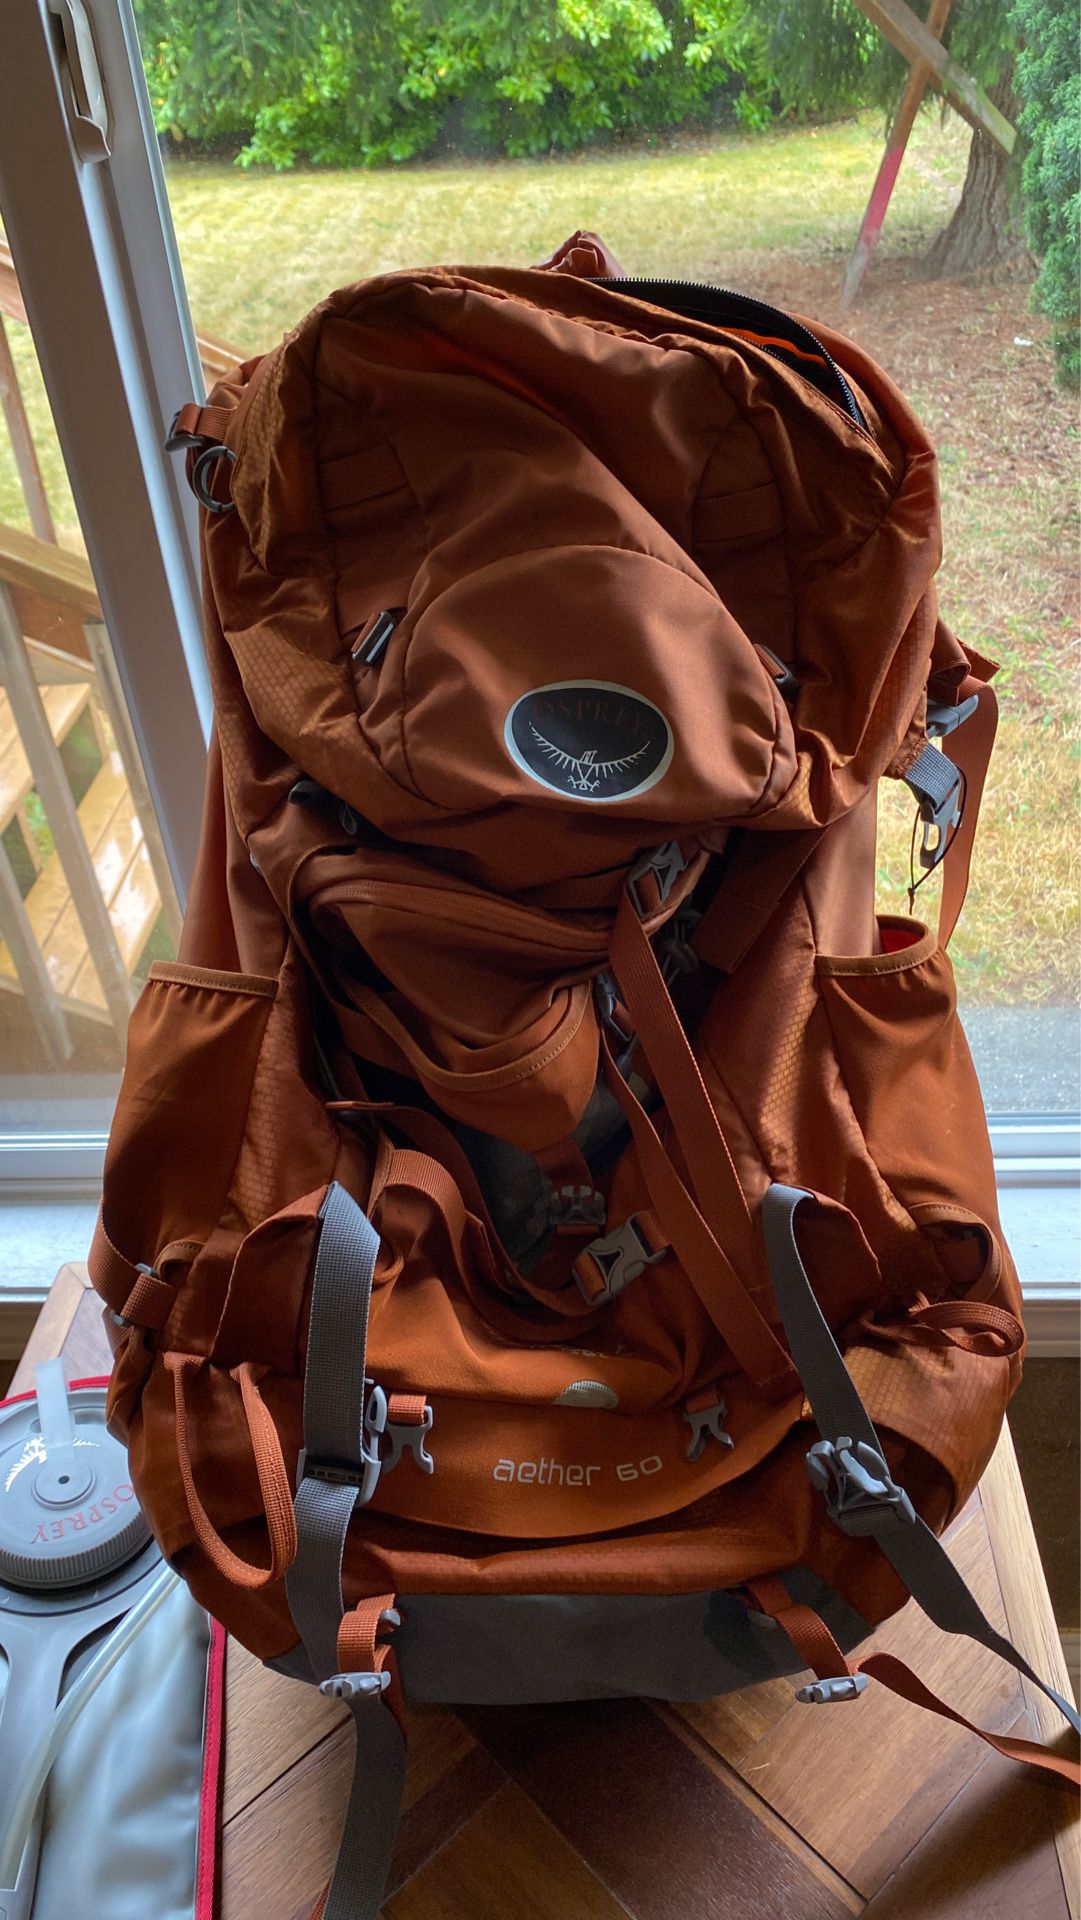 Osprey Aether 60 Pack